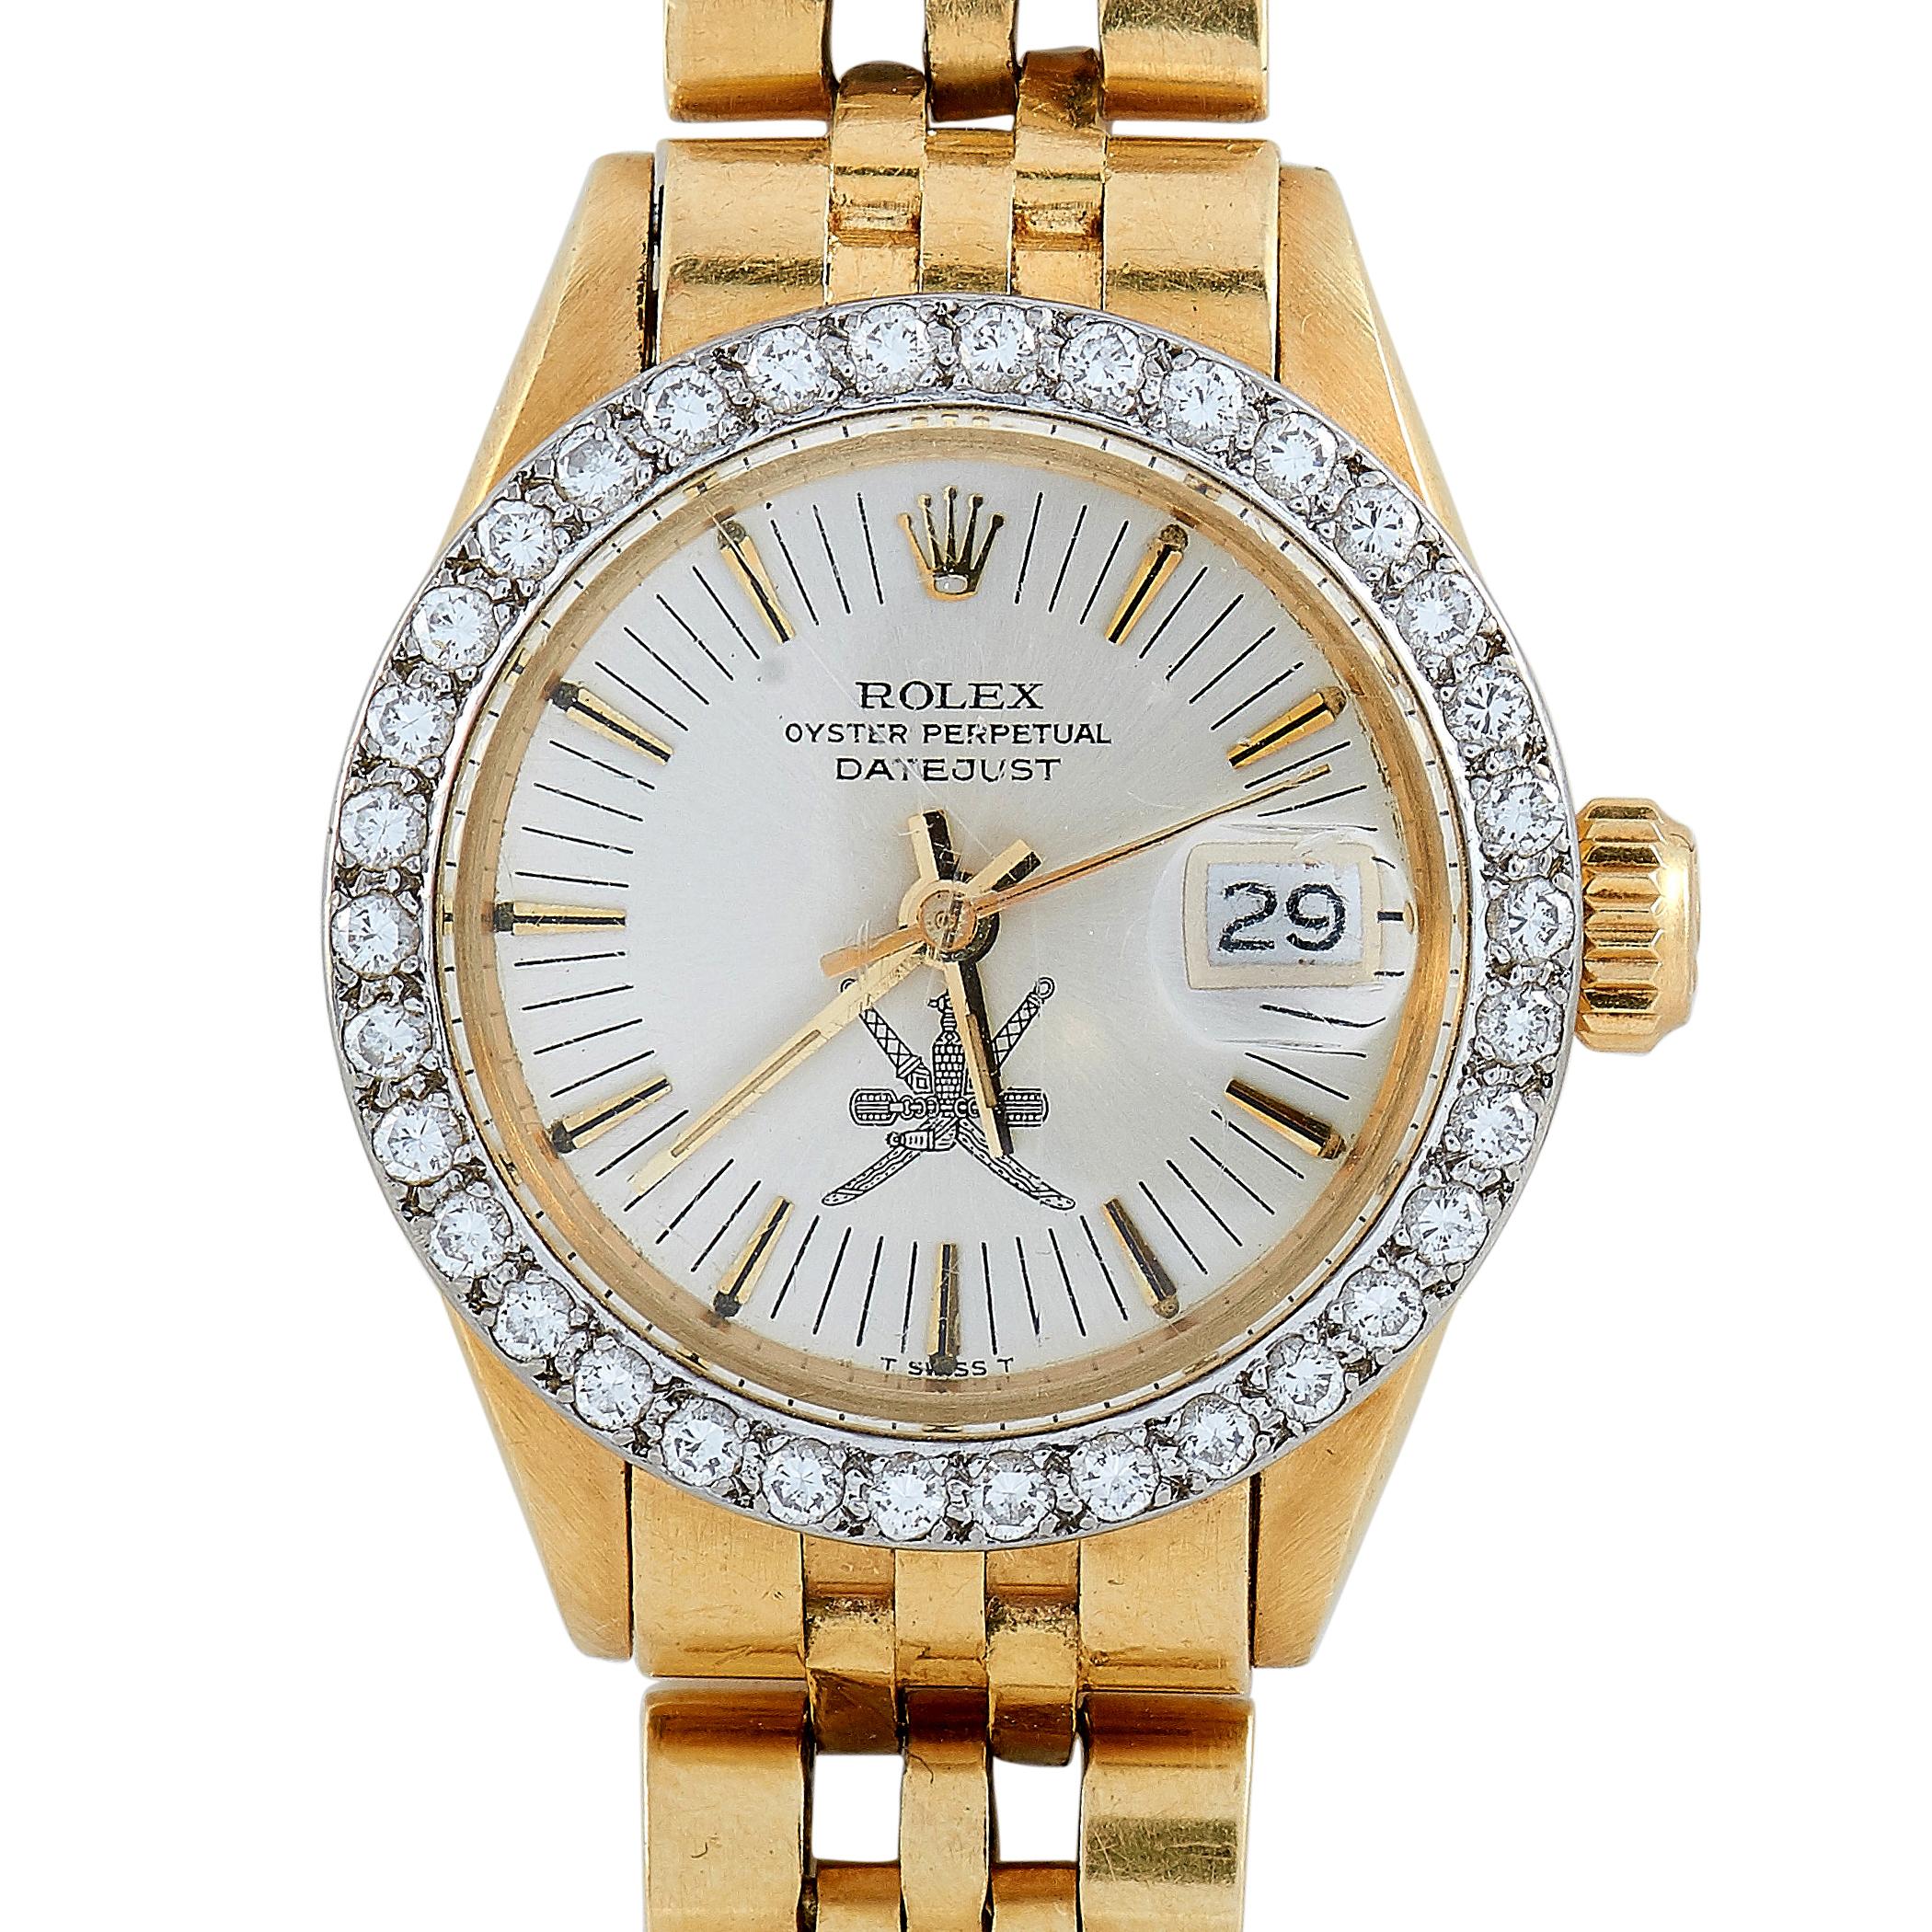 The Rolex Lady Datejust Khanjar watch, reference number 6913,3553920, boasts an 18K yellow gold case fitted with a diamond-set 18K white gold bezel. The case is presented on an 18K yellow gold Jubilee bracelet. The dial is accentuated with the Omani